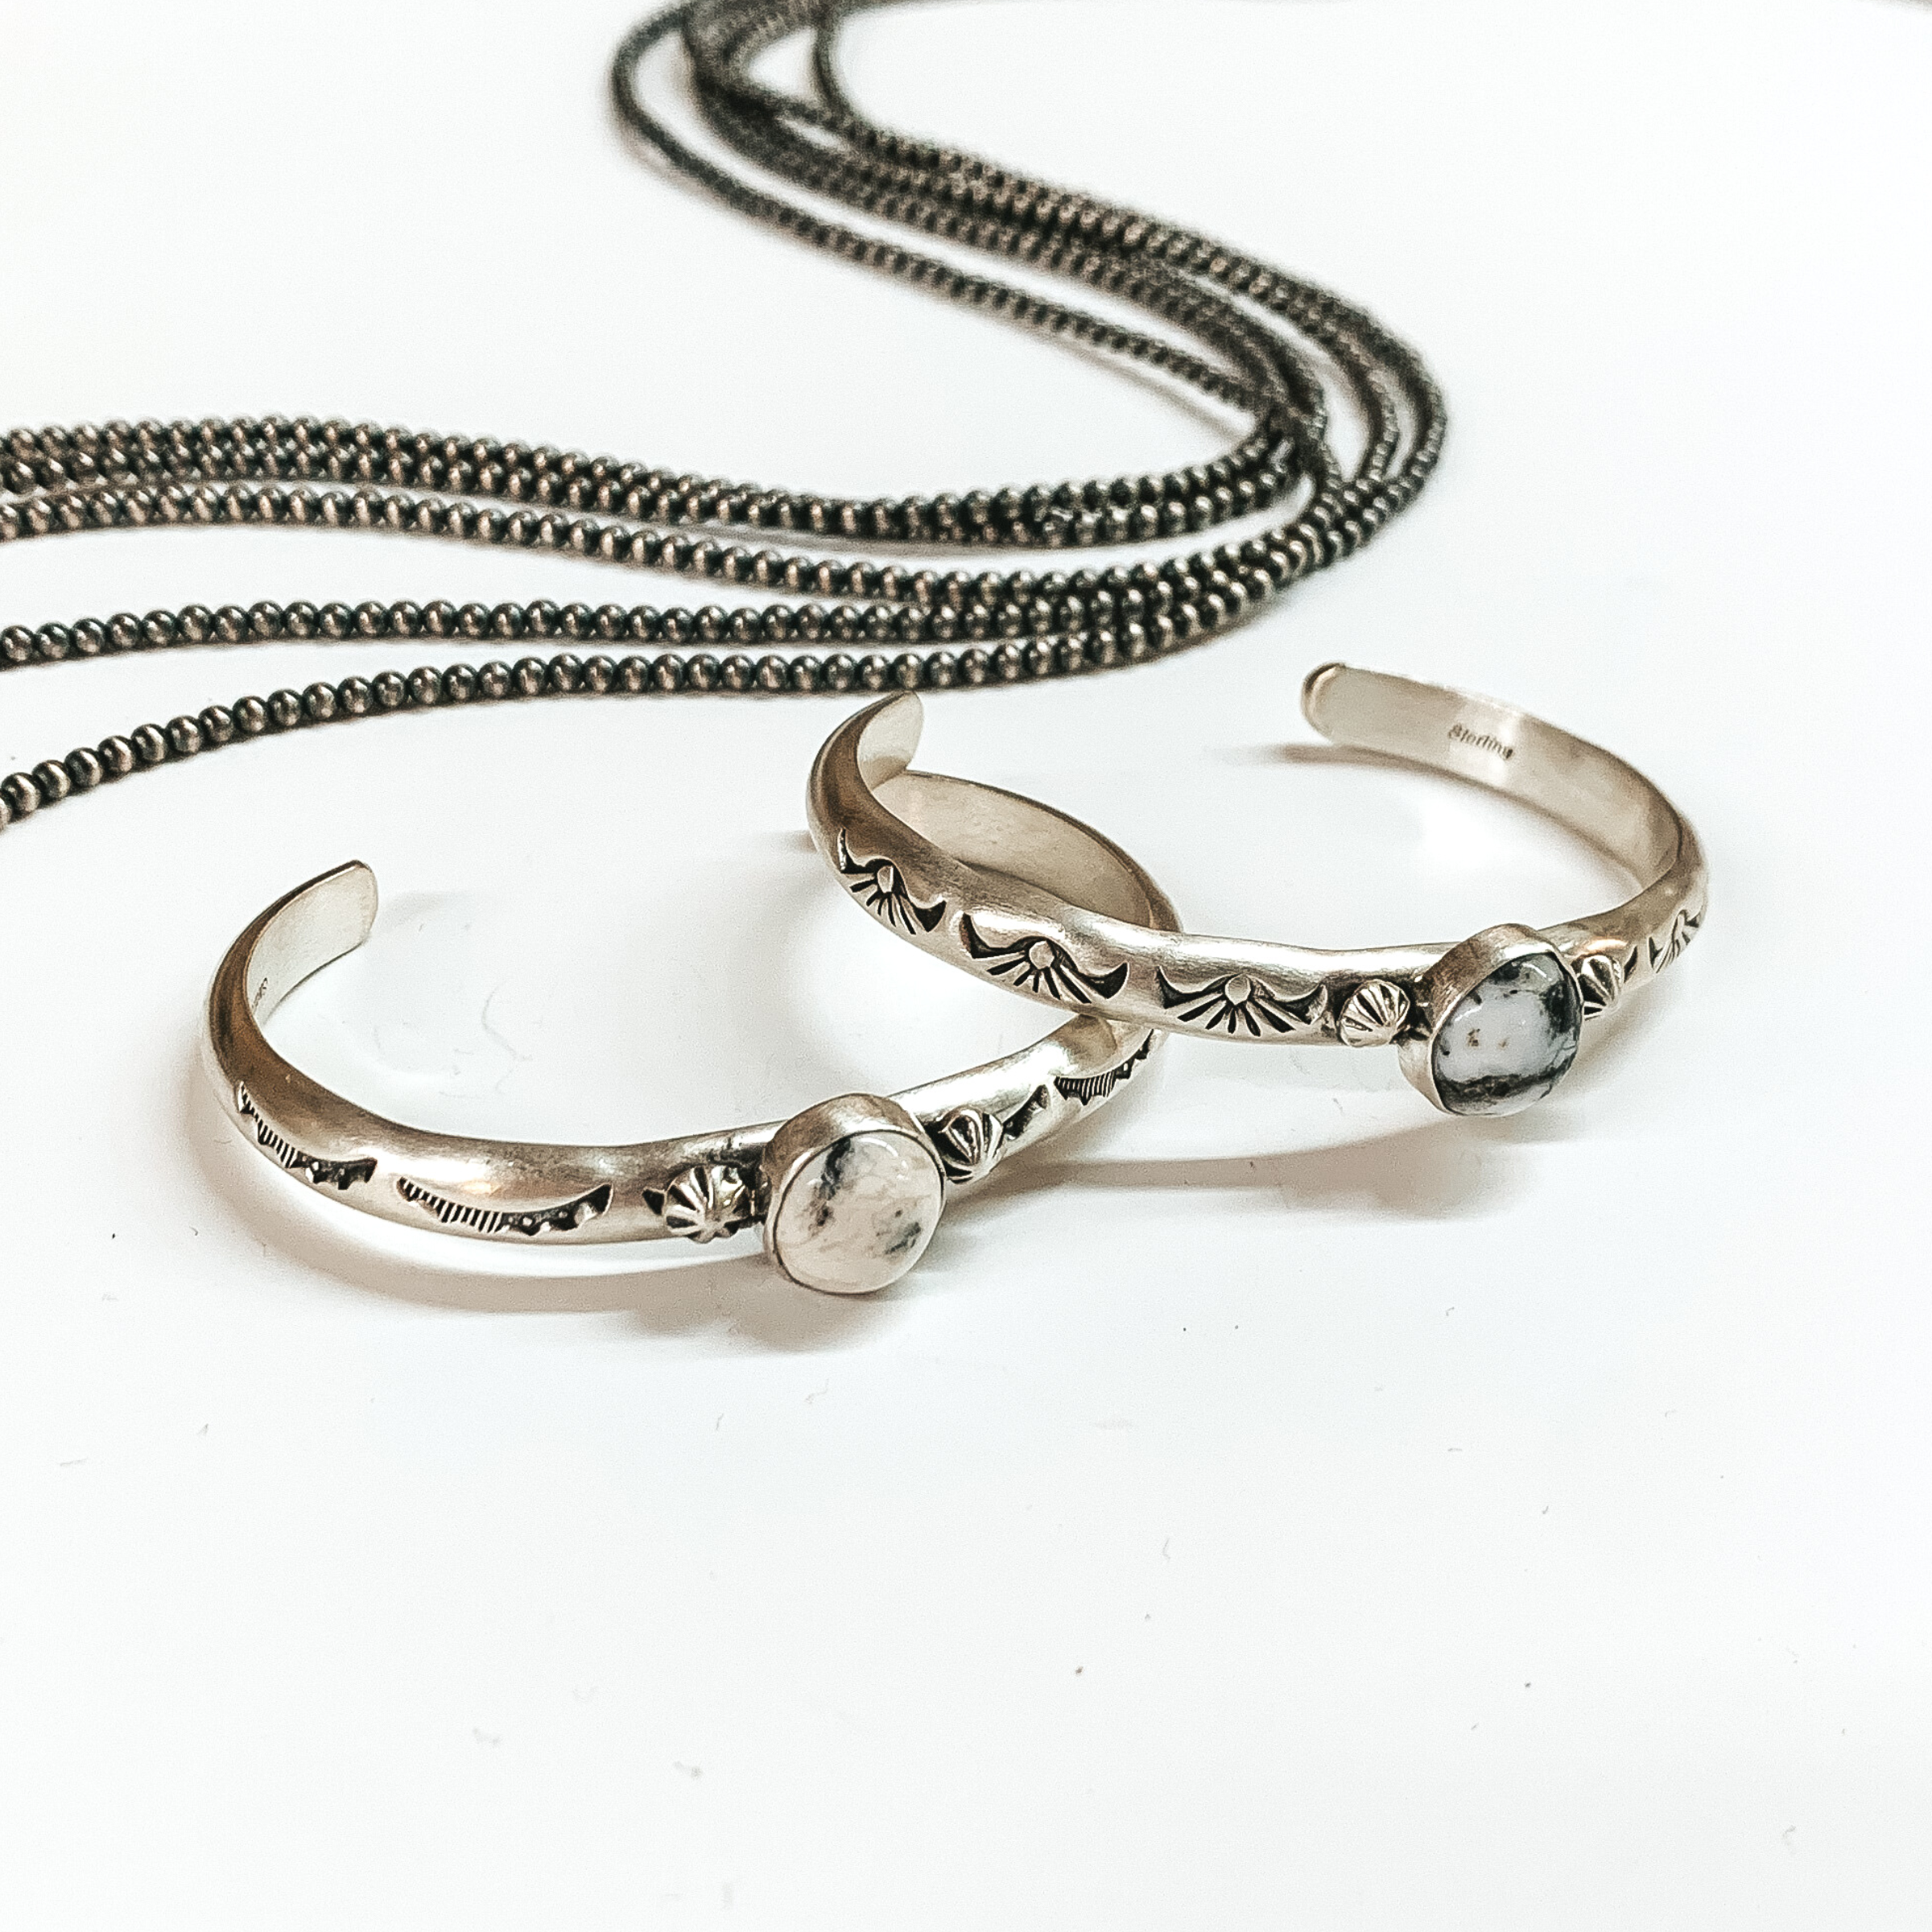 Two silver bangle bracelet with center white buffalo stones. These bangles also include engraved details. These bracelets are pictured on a white background with silver beads at the top of the picture. 